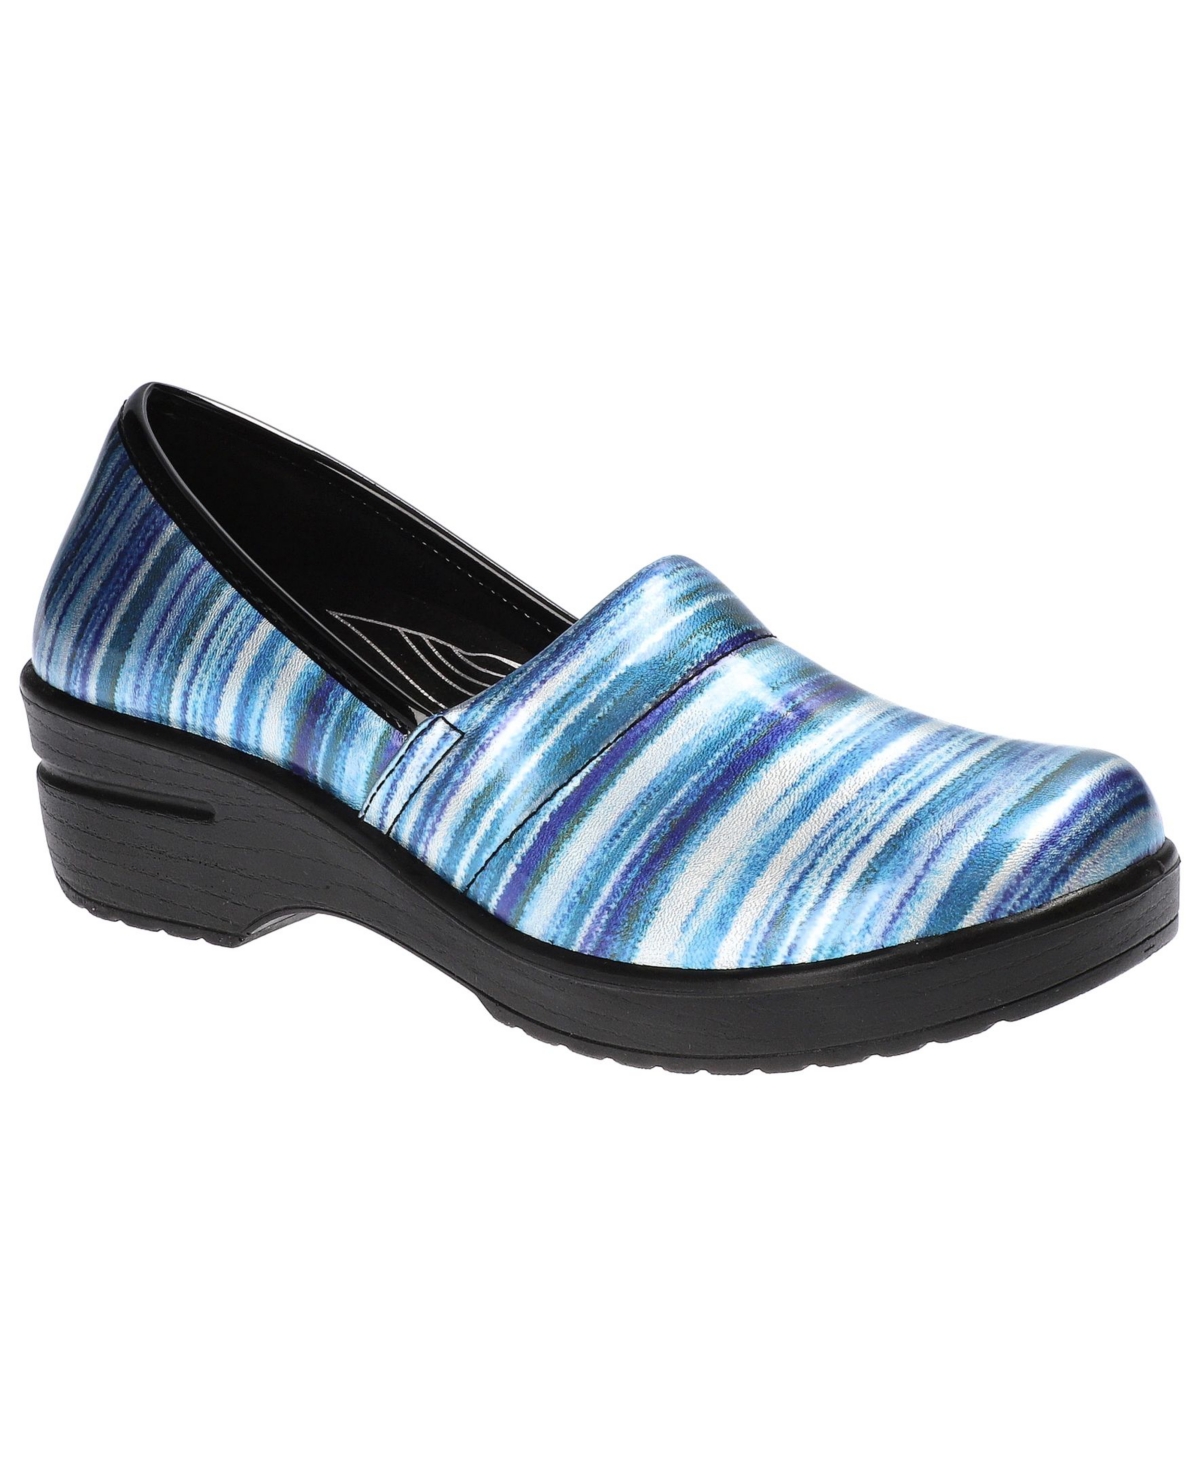 Easy Works by Easy Street Women's Laurie Clogs - Multi Metallic Stripes Patent